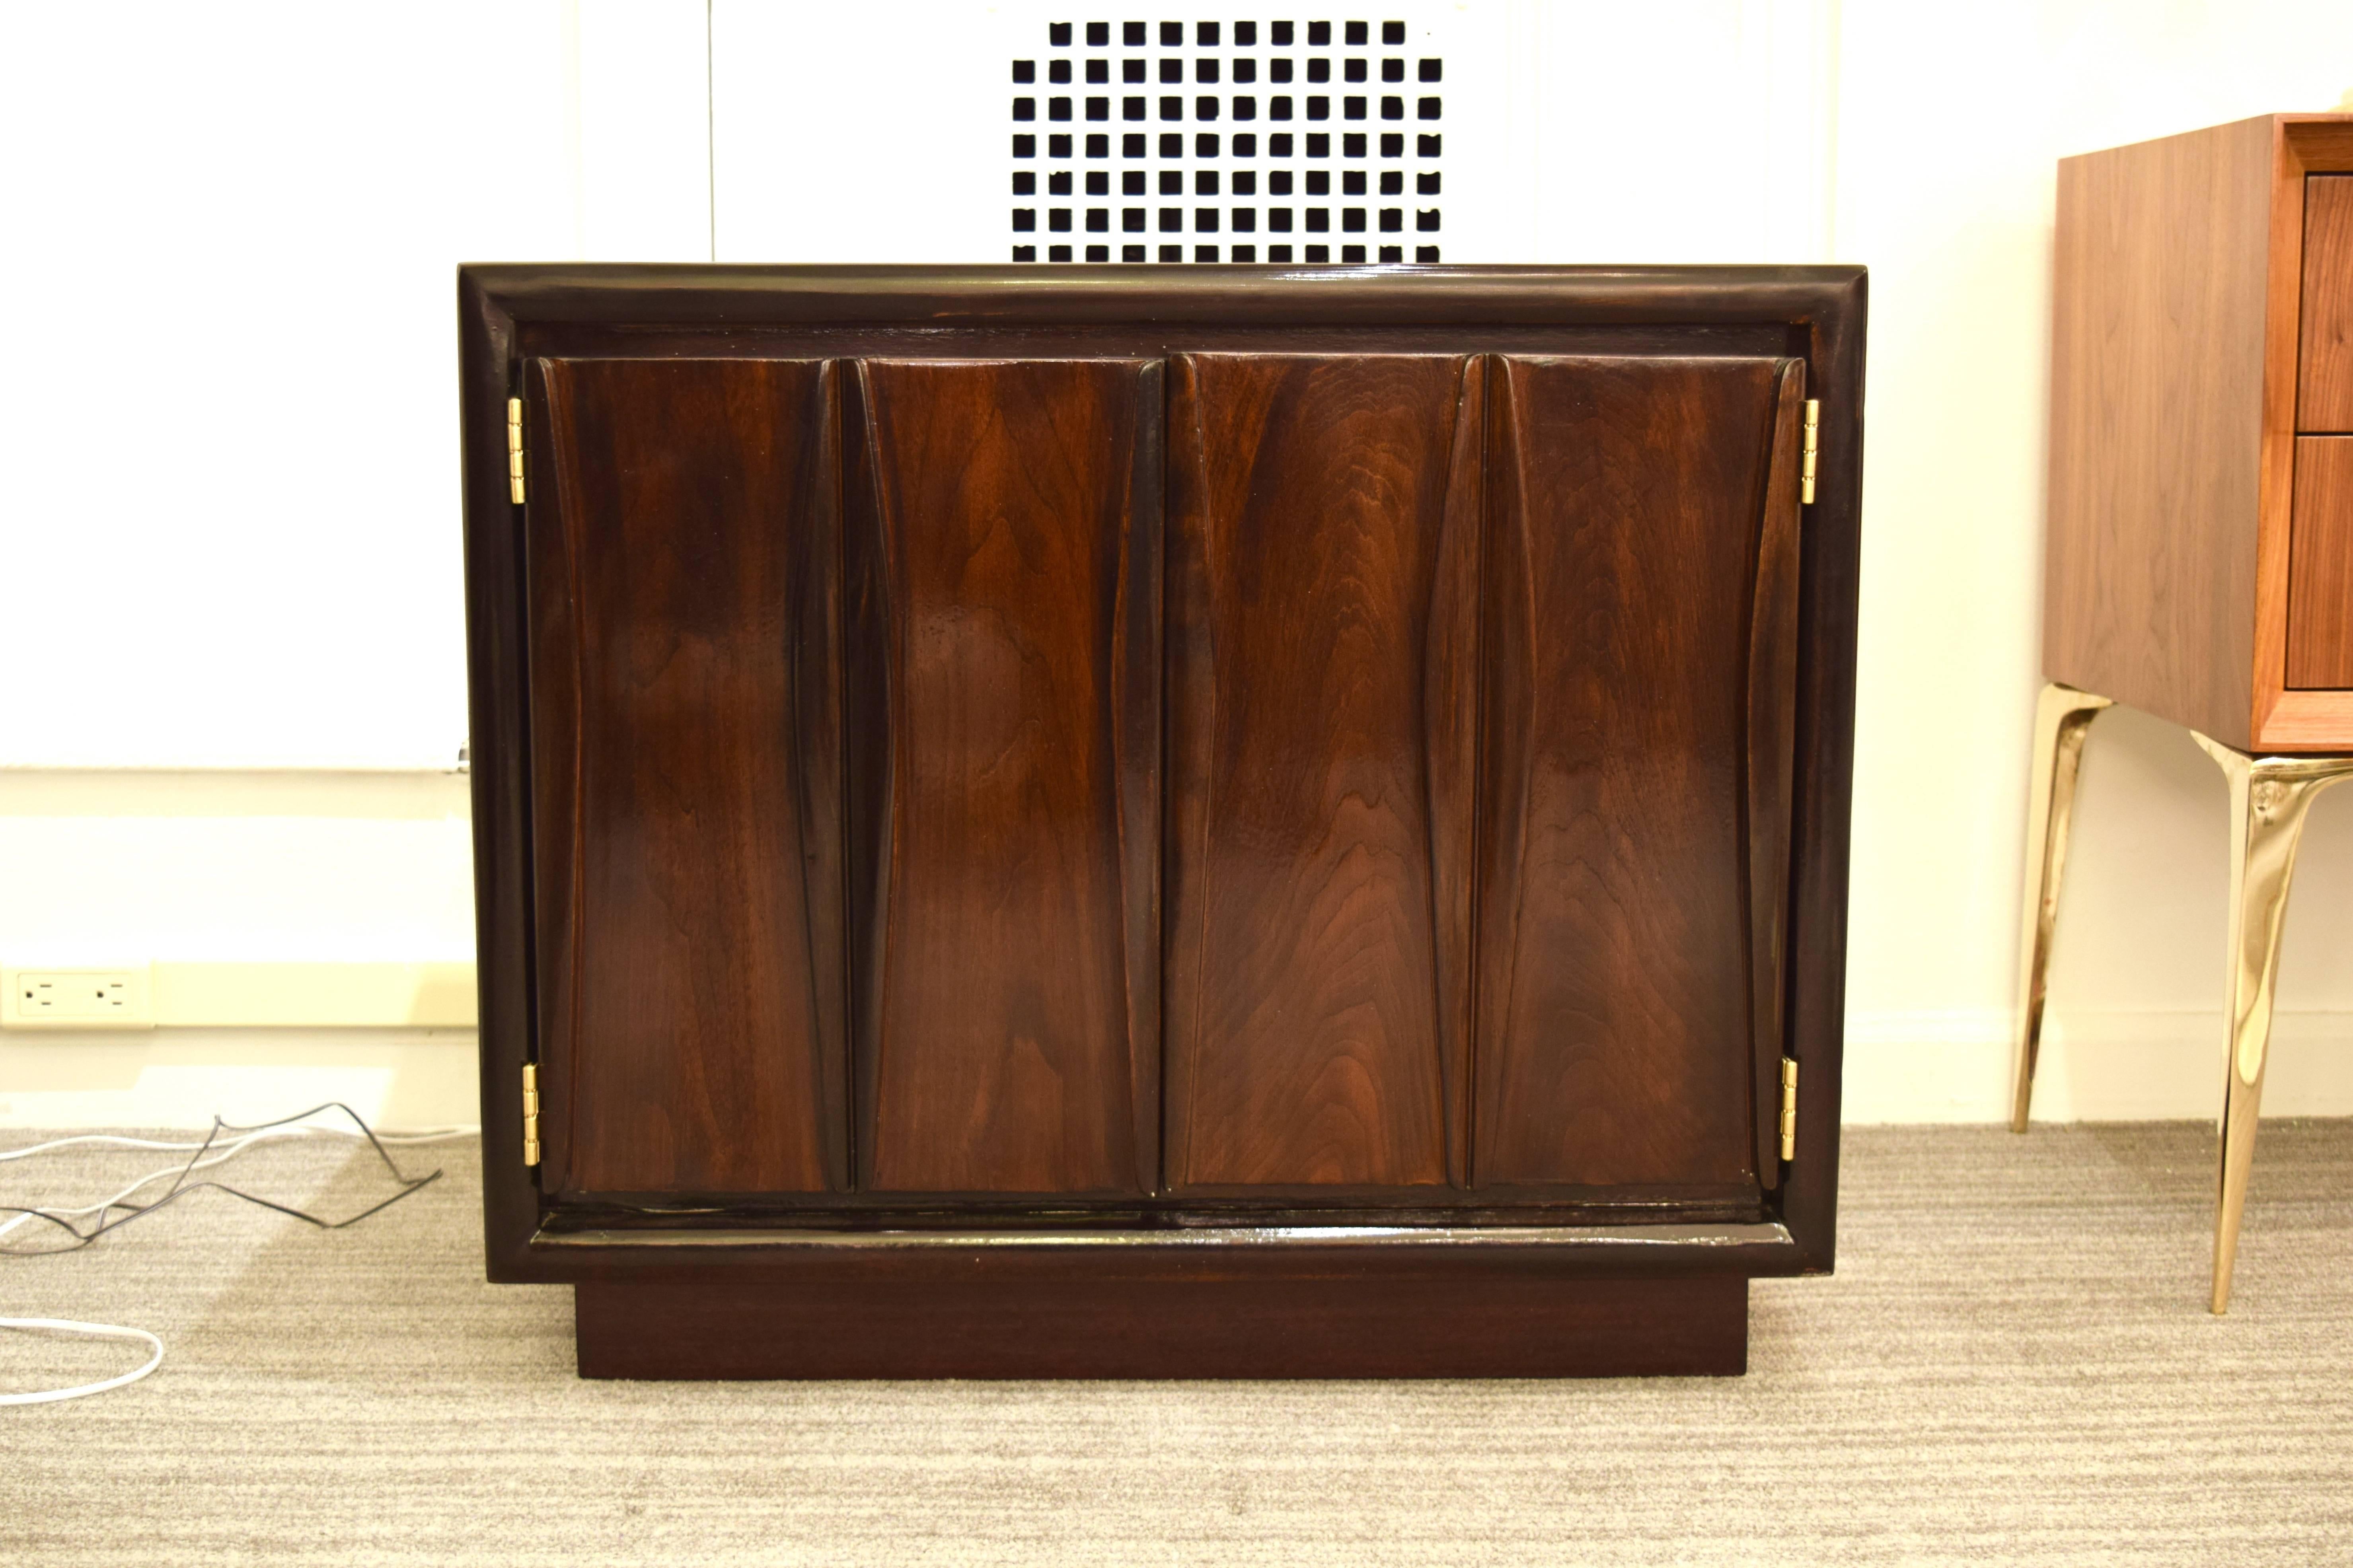 Pair of sculpted front double-door single drawer with open shelf small chests or end tables. Finished in a glossy deep walnut. Great storage for bedroom or living room.